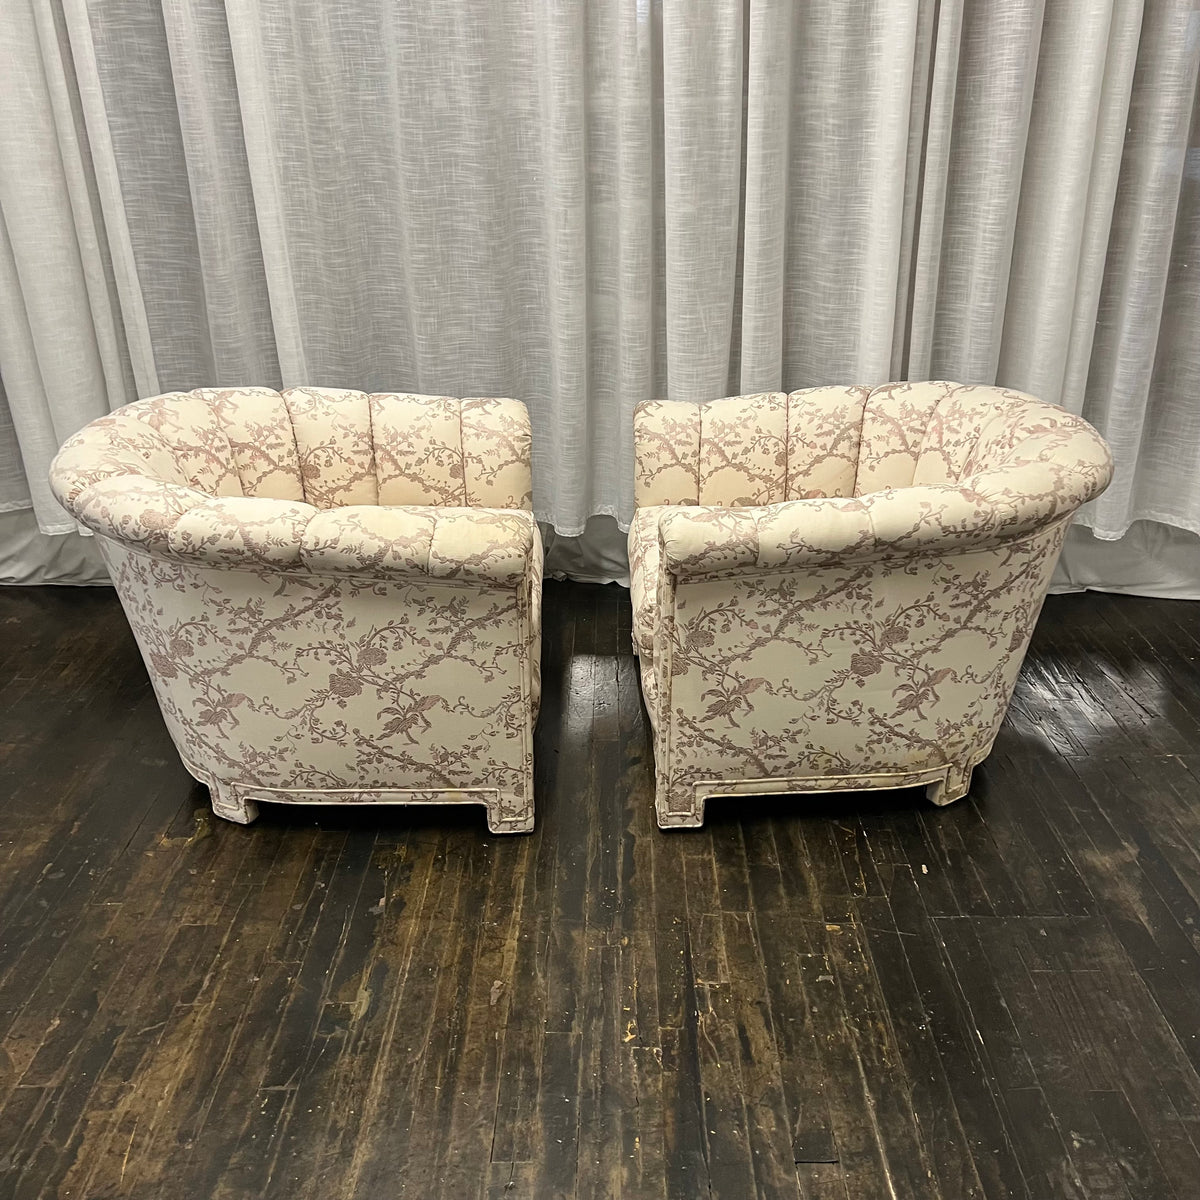 Pair of Art Deco Style Channel Back Lounge Chairs attributed to Baker.  reupholstered some time in the late 70's.  The existing fabric has shades of mauve and lavender on a cream colored background. The fabric is in good shape....but there are some stains at the base of the chair and the arms.  Chicago, IL